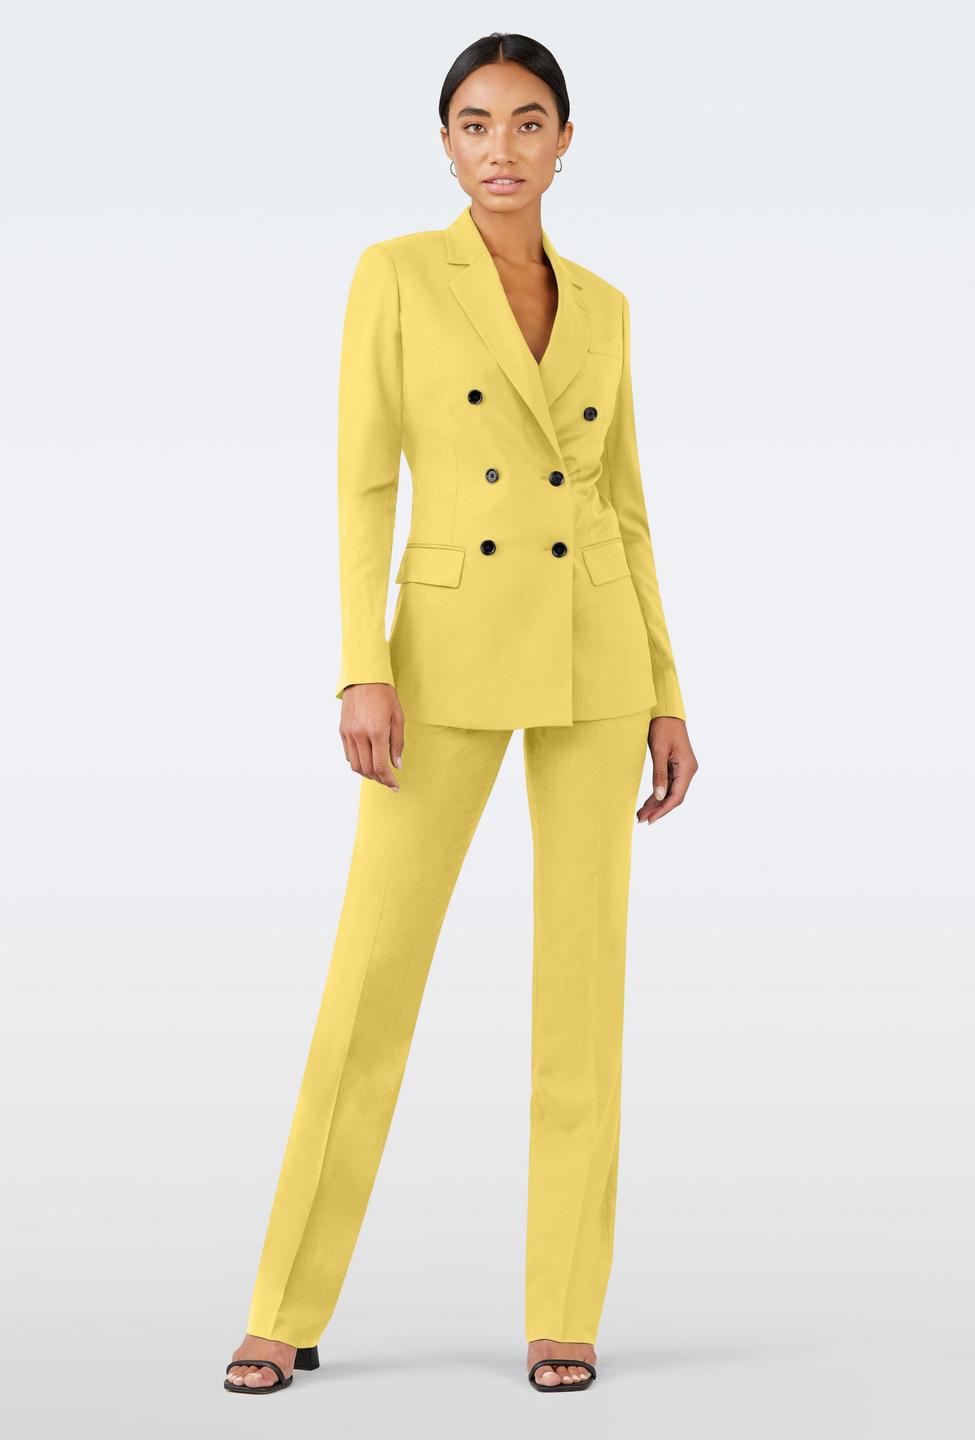 Yellow suit women - Harrogate Solid Design from Luxury Indochino Collection